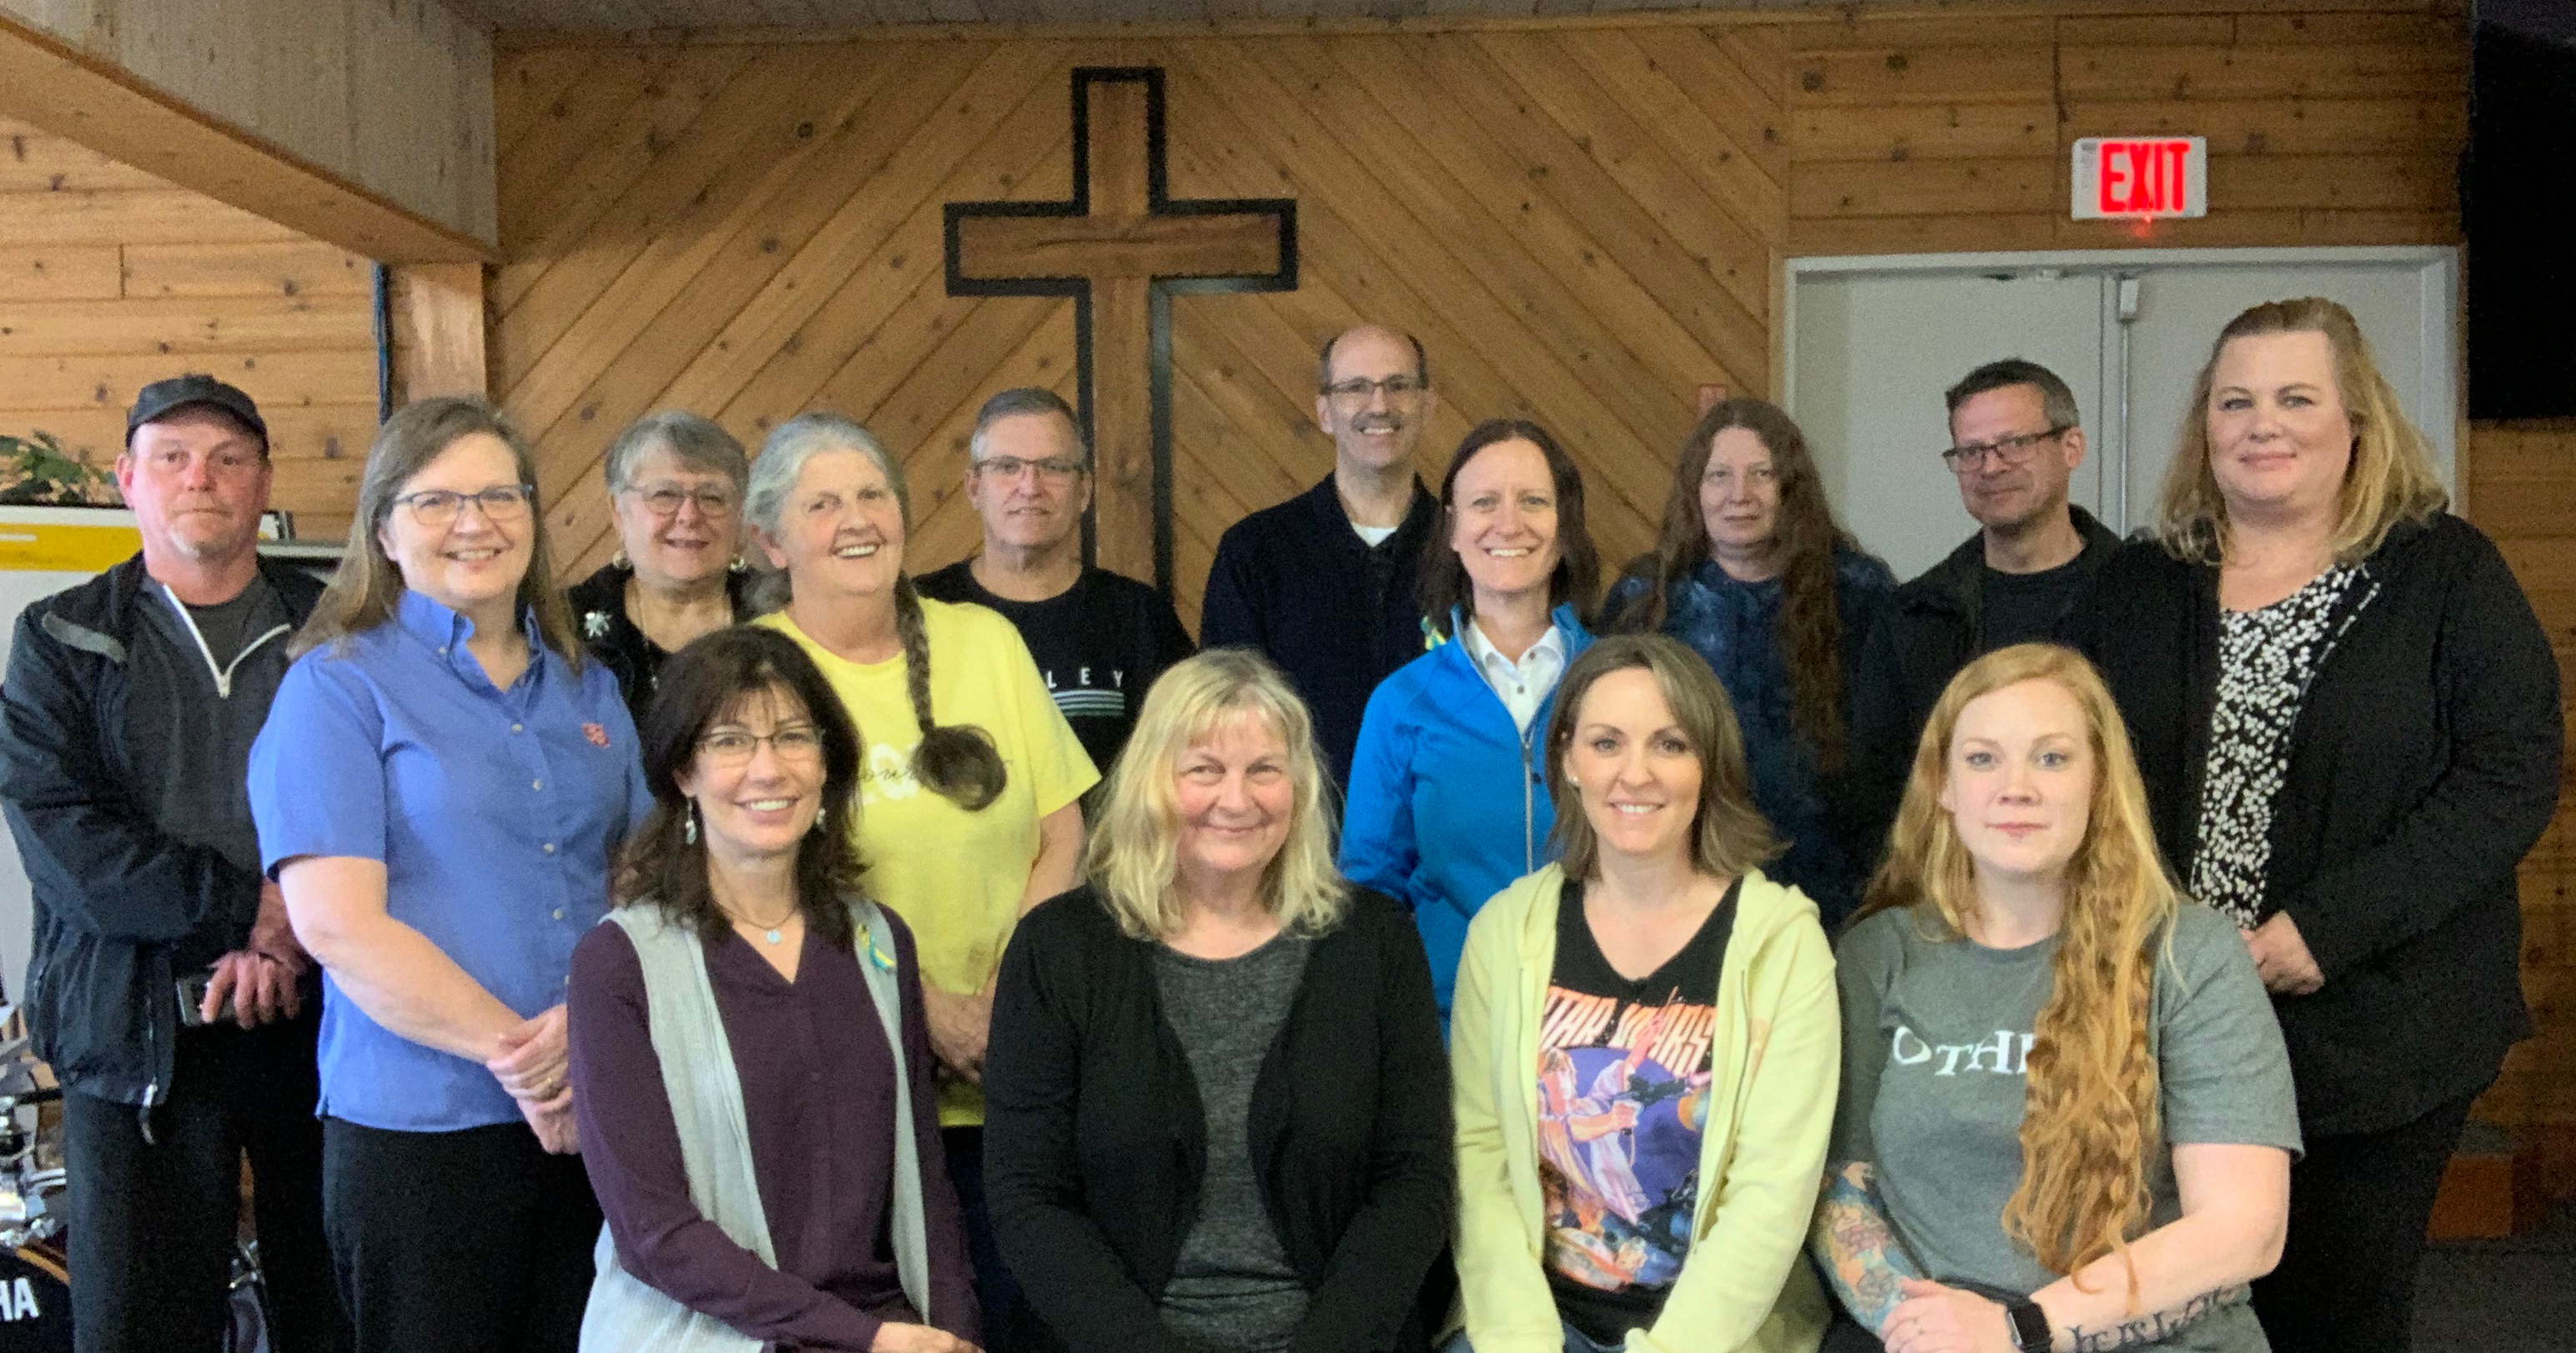 The Comox Valley Ministry team